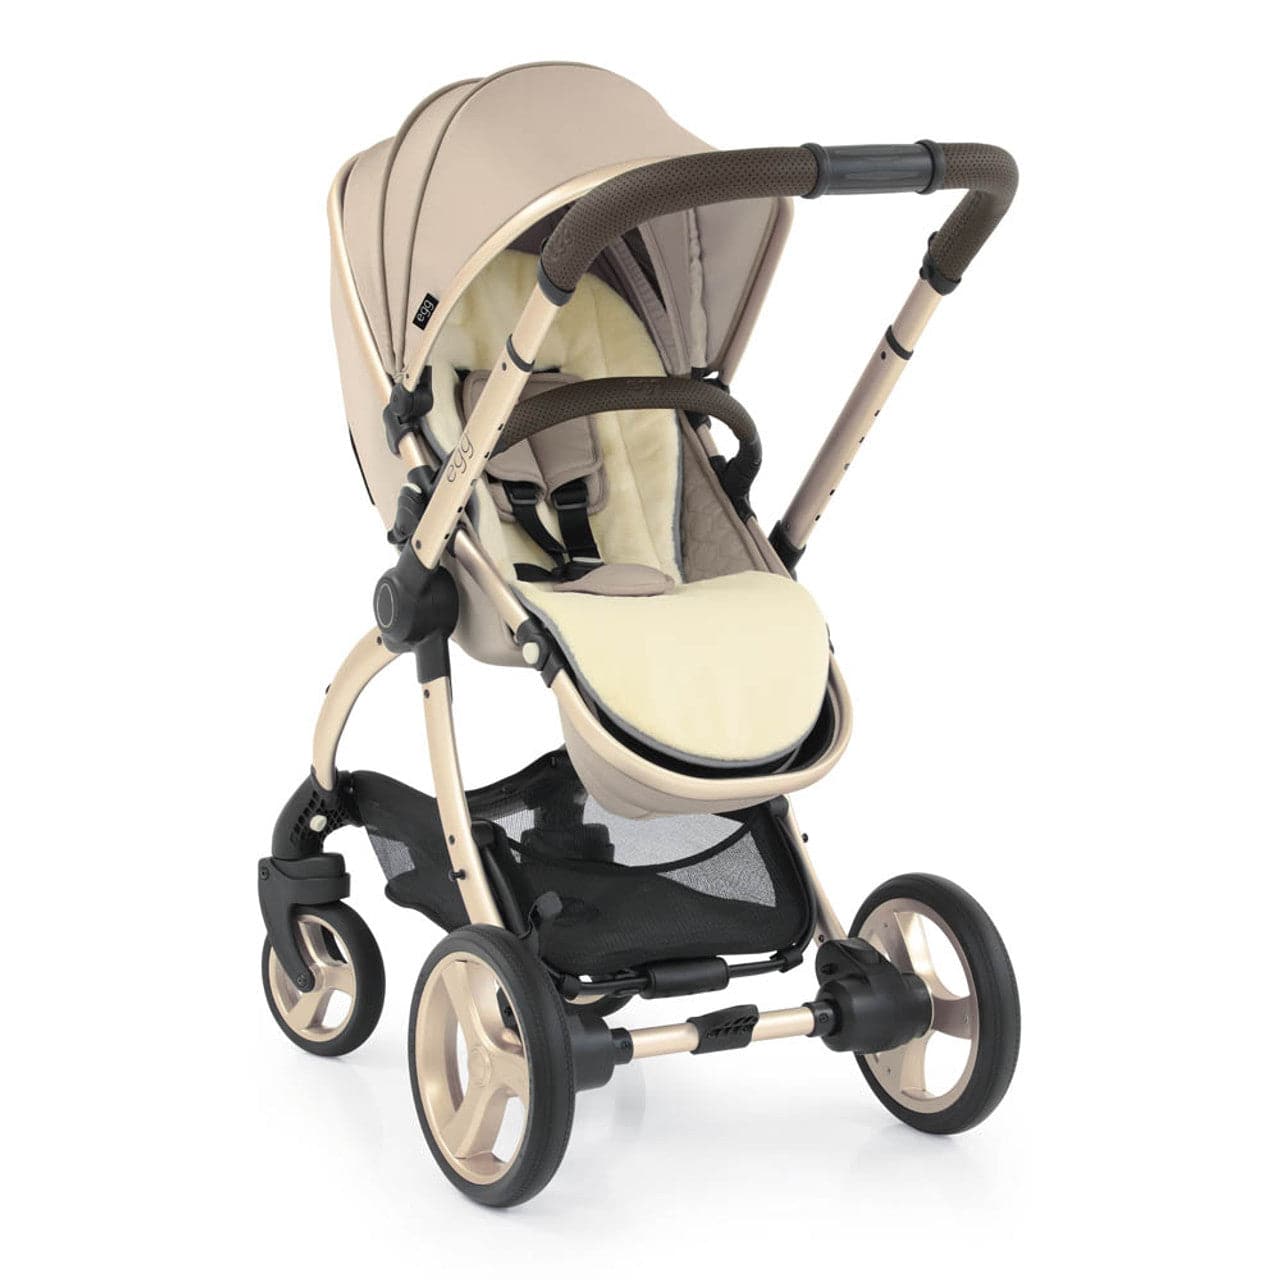 Egg® 2 Pushchair + Carrycot - Feather - For Your Little One